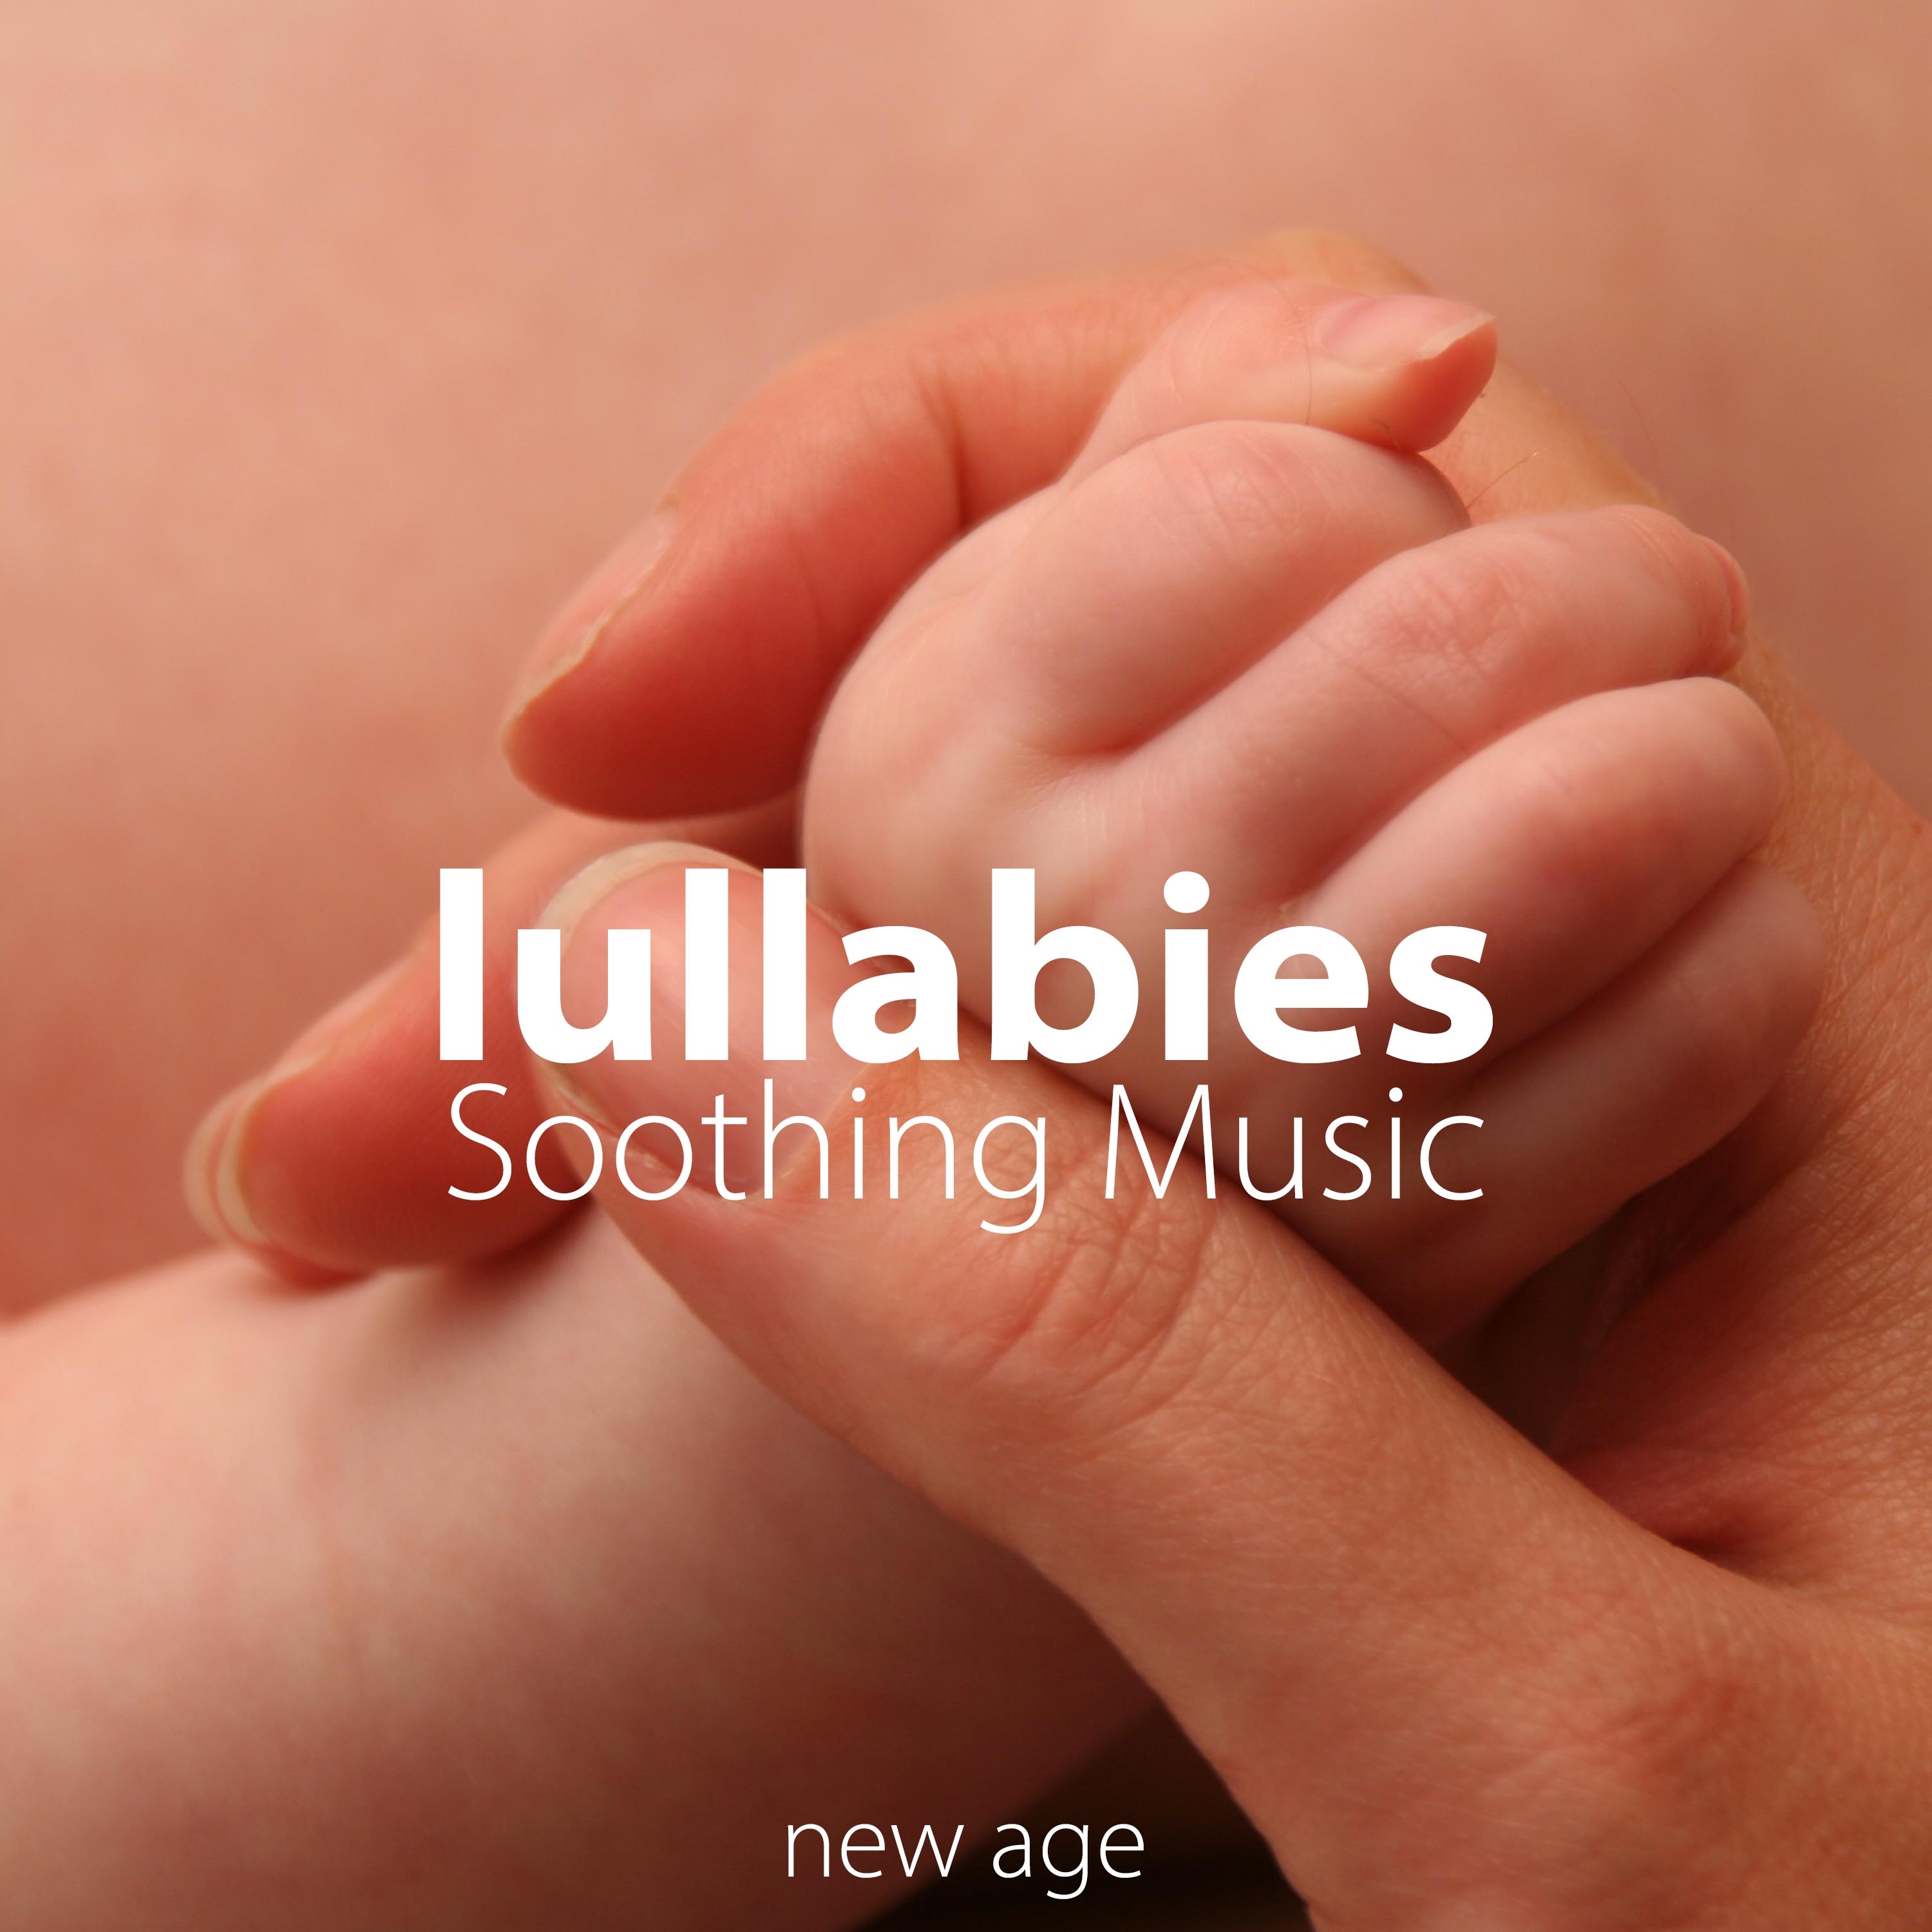 Lullabies - Soothing Music for Newborns, Babies, Pregnant Mothers, Relaxing music with Nature Sounds